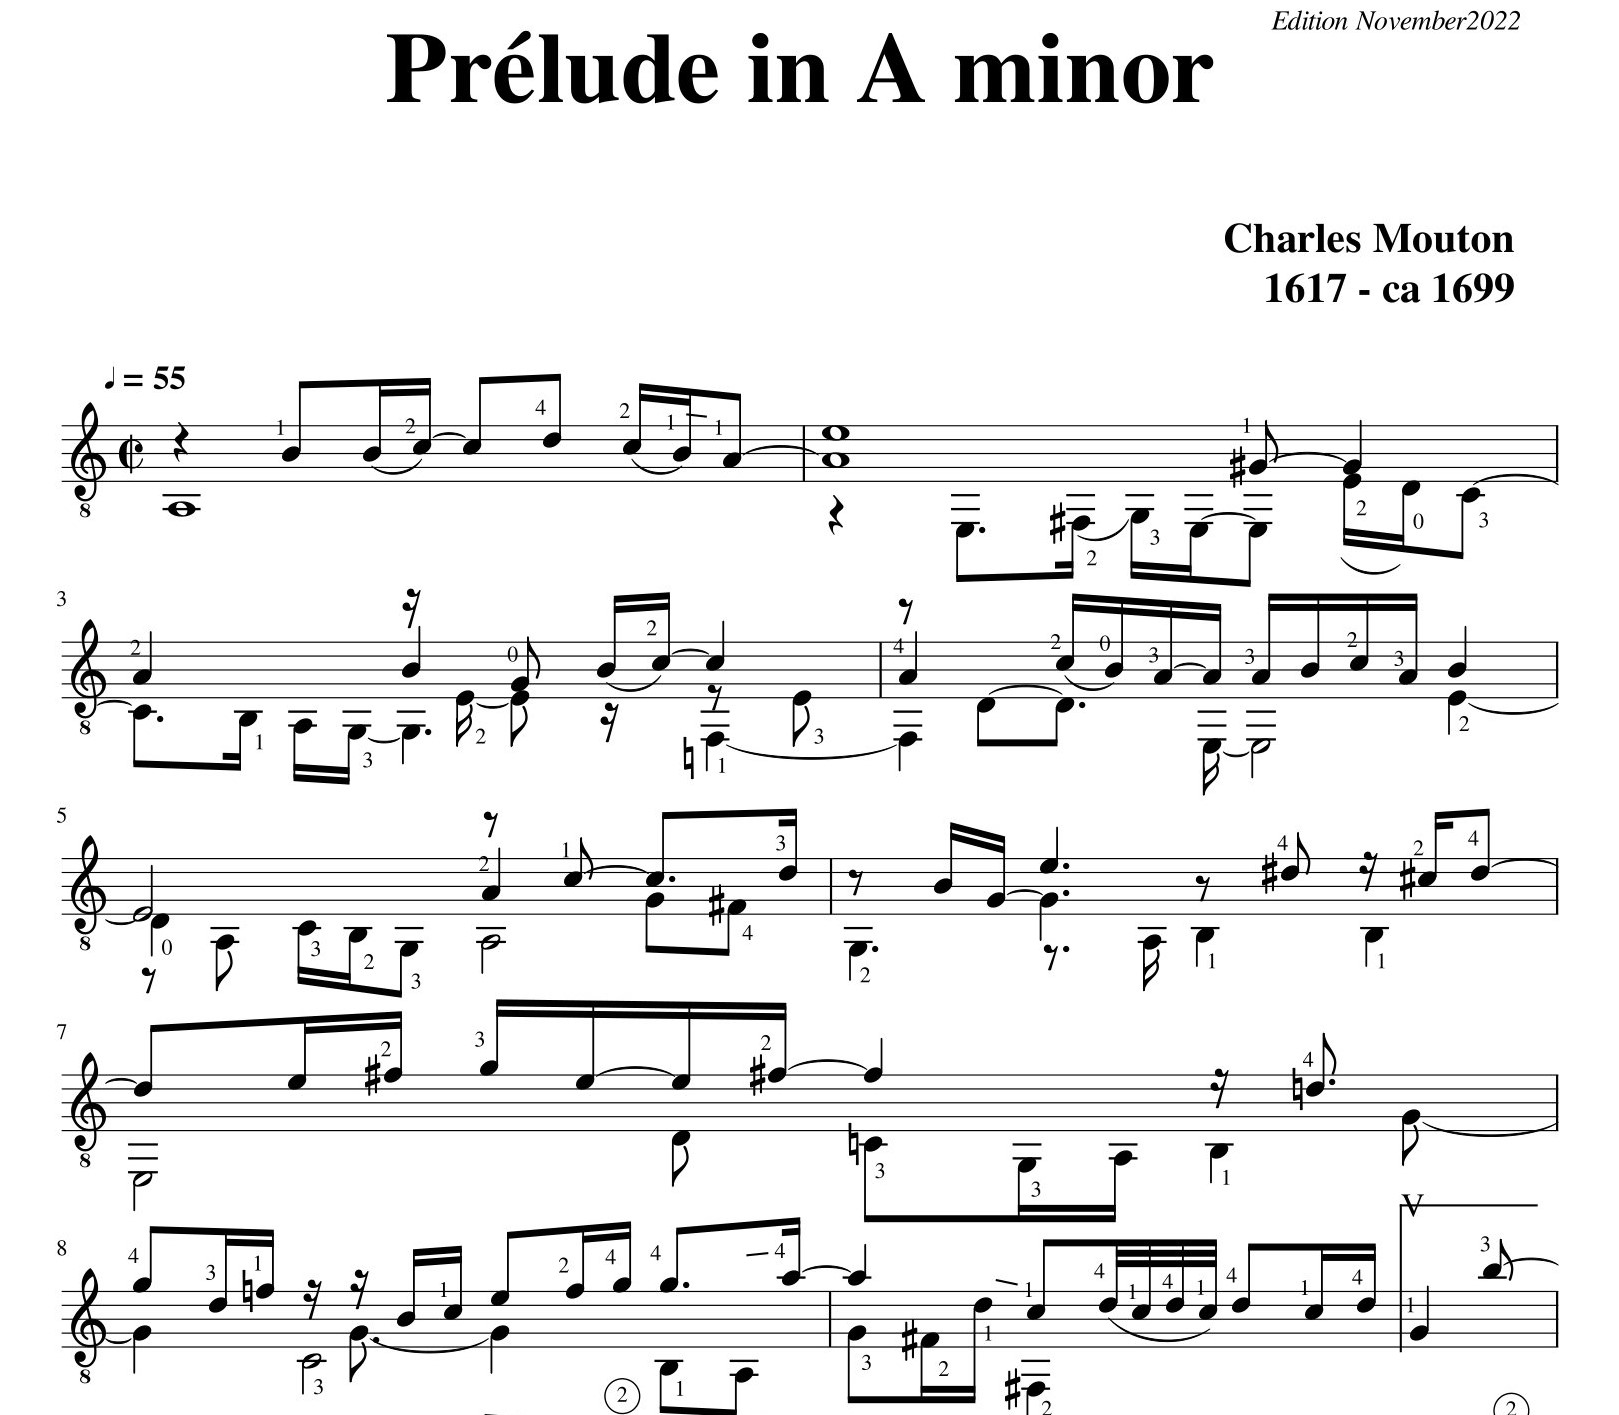 Charles Mouton Suite 1 Prelude in A minor